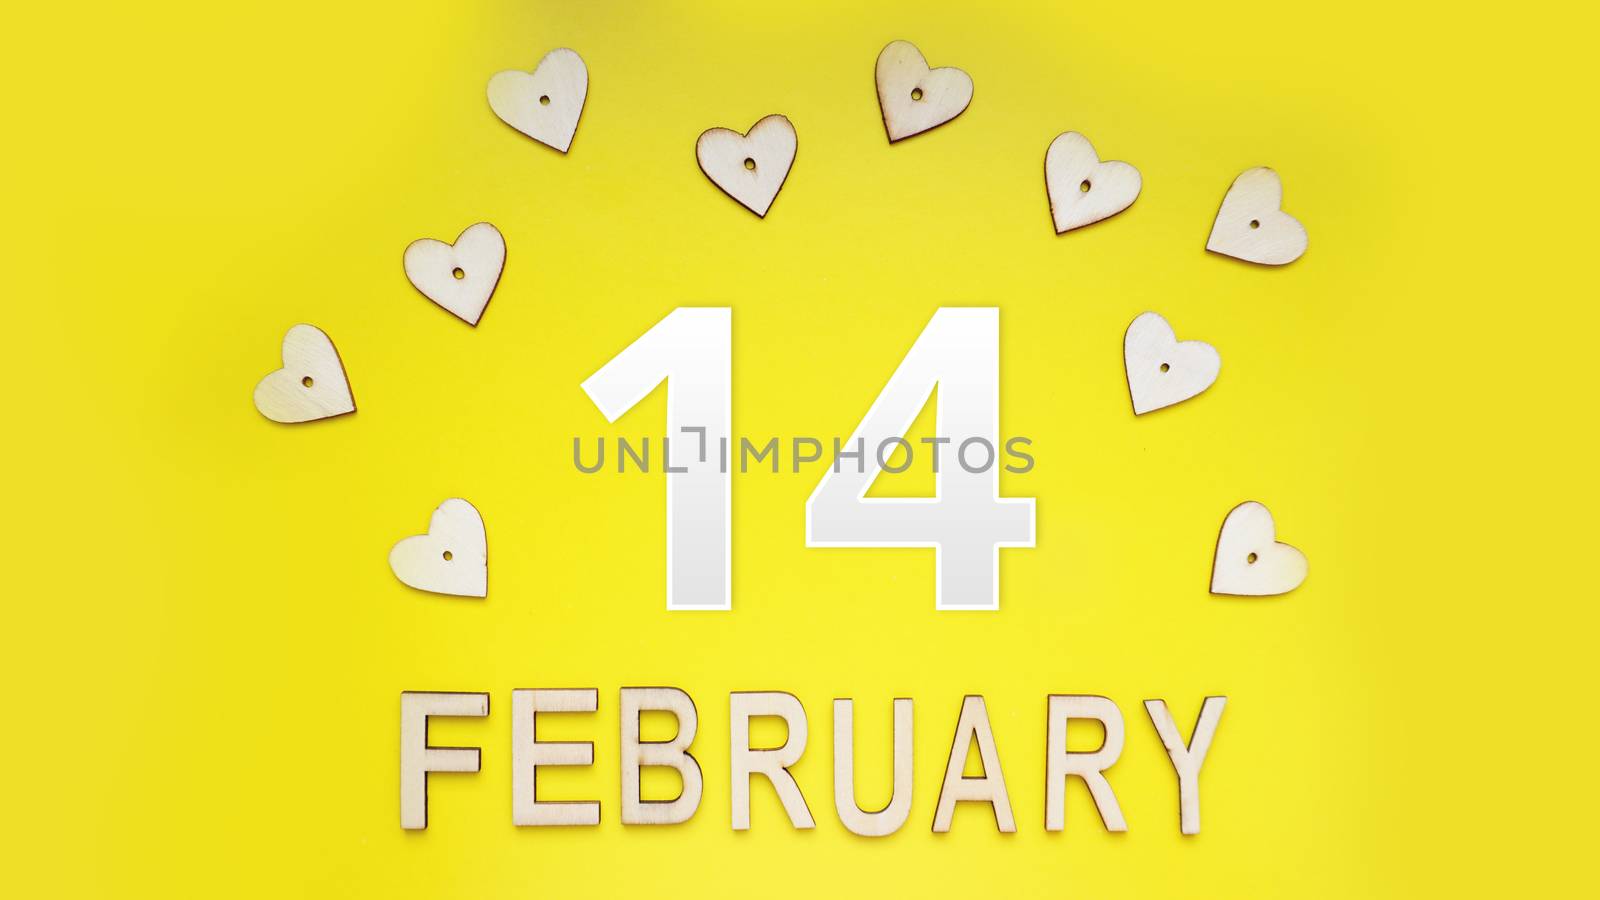 Valentines day background with hearts on yellow background by natali_brill